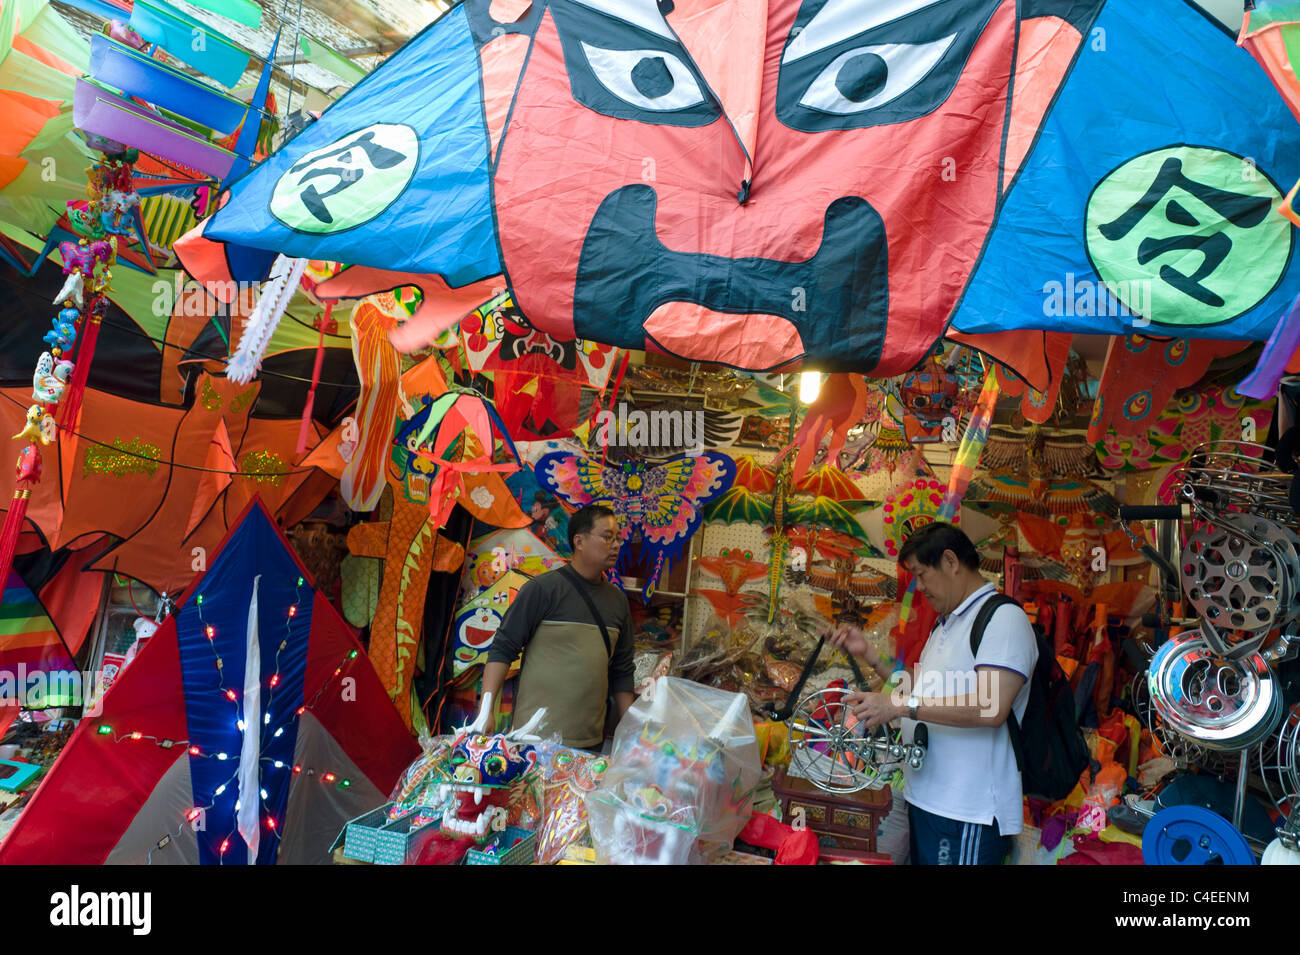 Kites for sale at Chenghuangmiao market. Shanghai, China Stock Photo